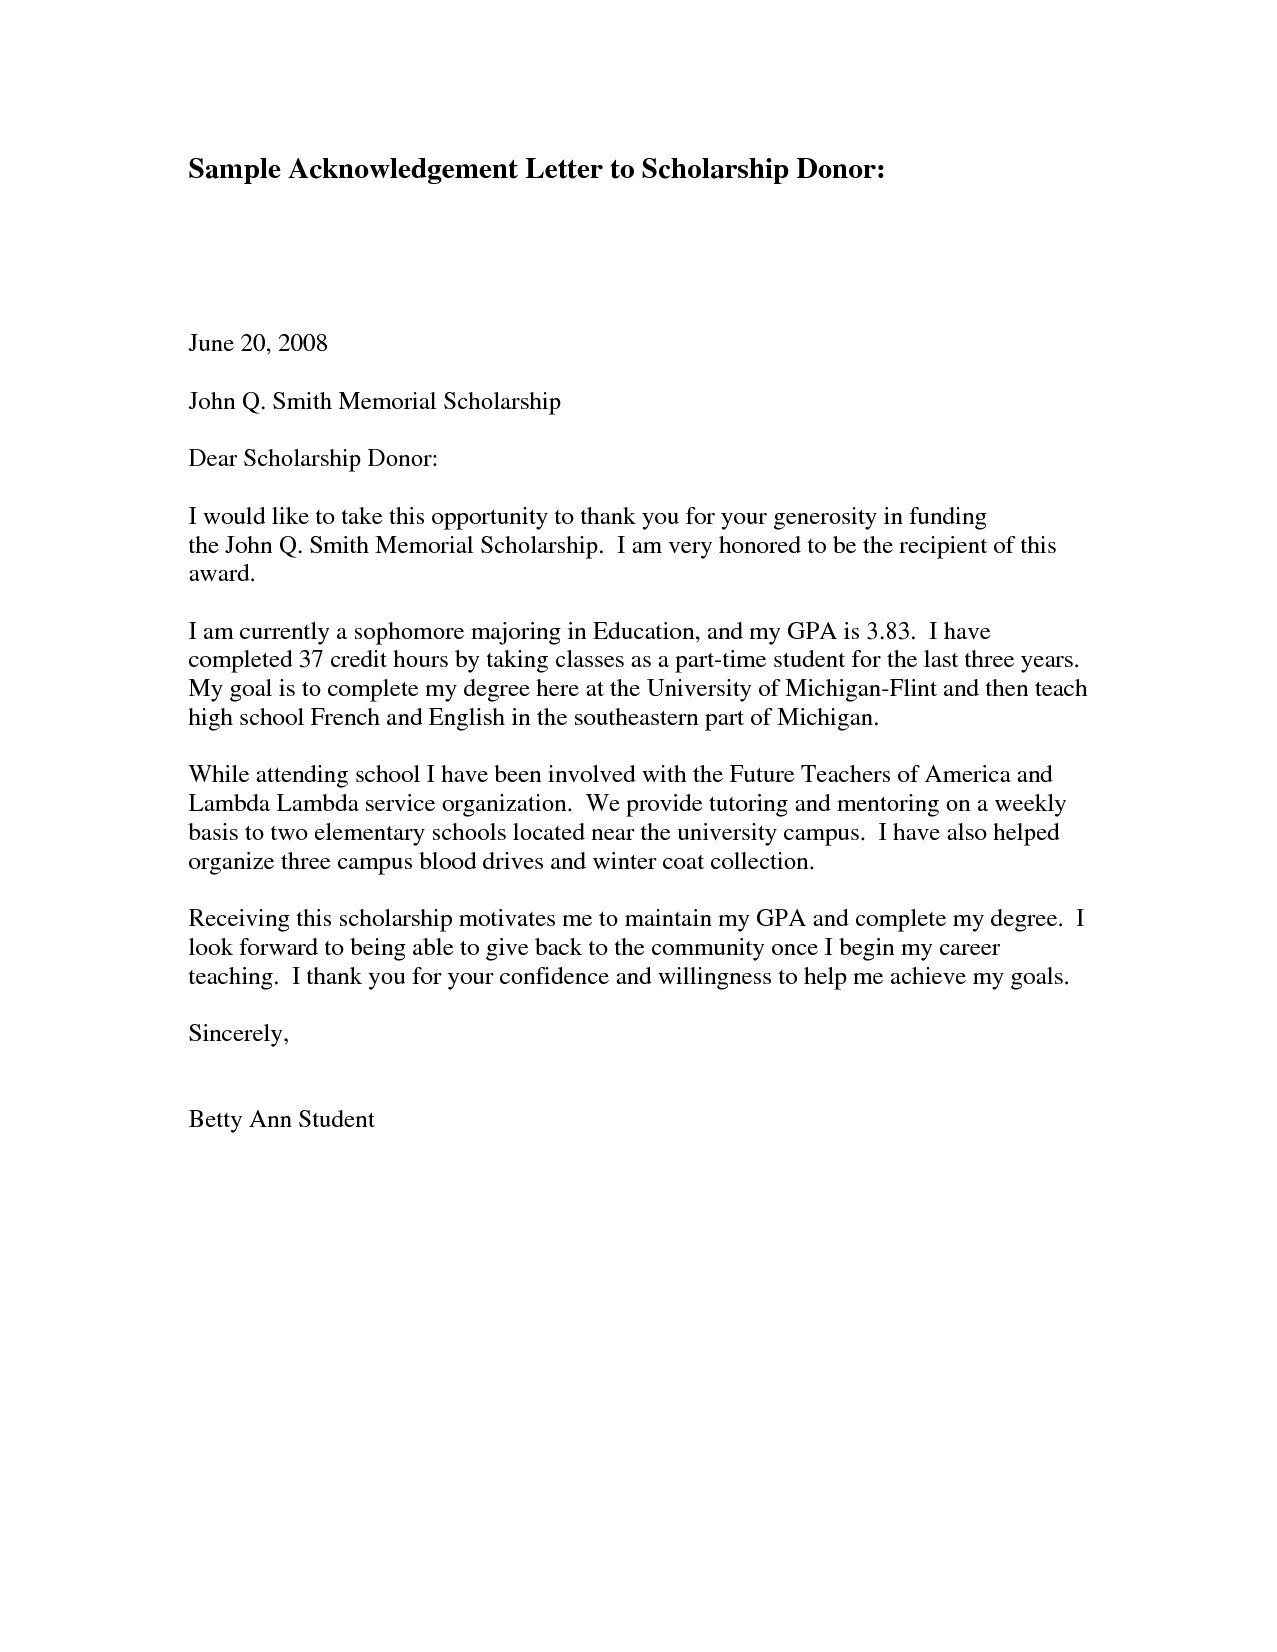 Business Valuation Letter Sample  Manswikstromse with Valuation Letter Template